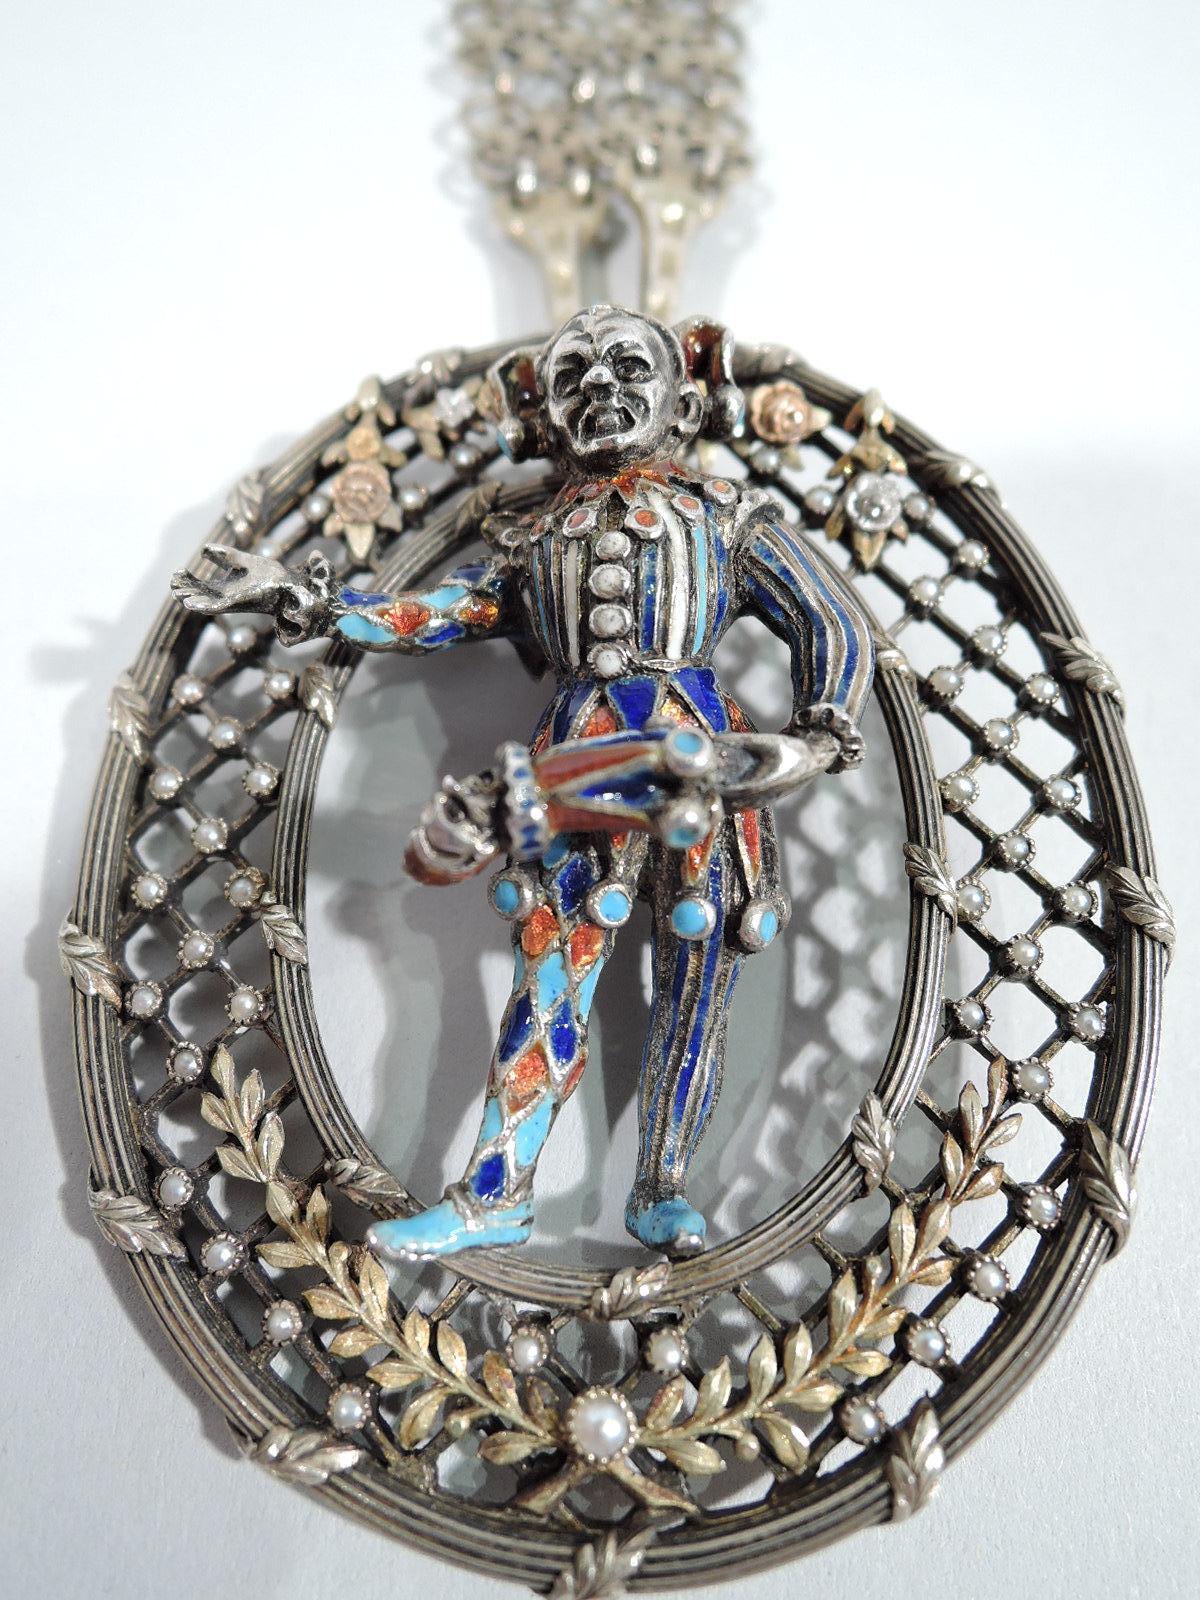 English Renaissance-Revival silver gilt and enamel pendant of jester, ca. 1880. Jester is set in oval with lattice, baby seed pearls, and foliate border with gilt wreaths and flora. With gilt-metal chain. 

Dimensions: Pendant: H 2 3/8 x W 2 in.